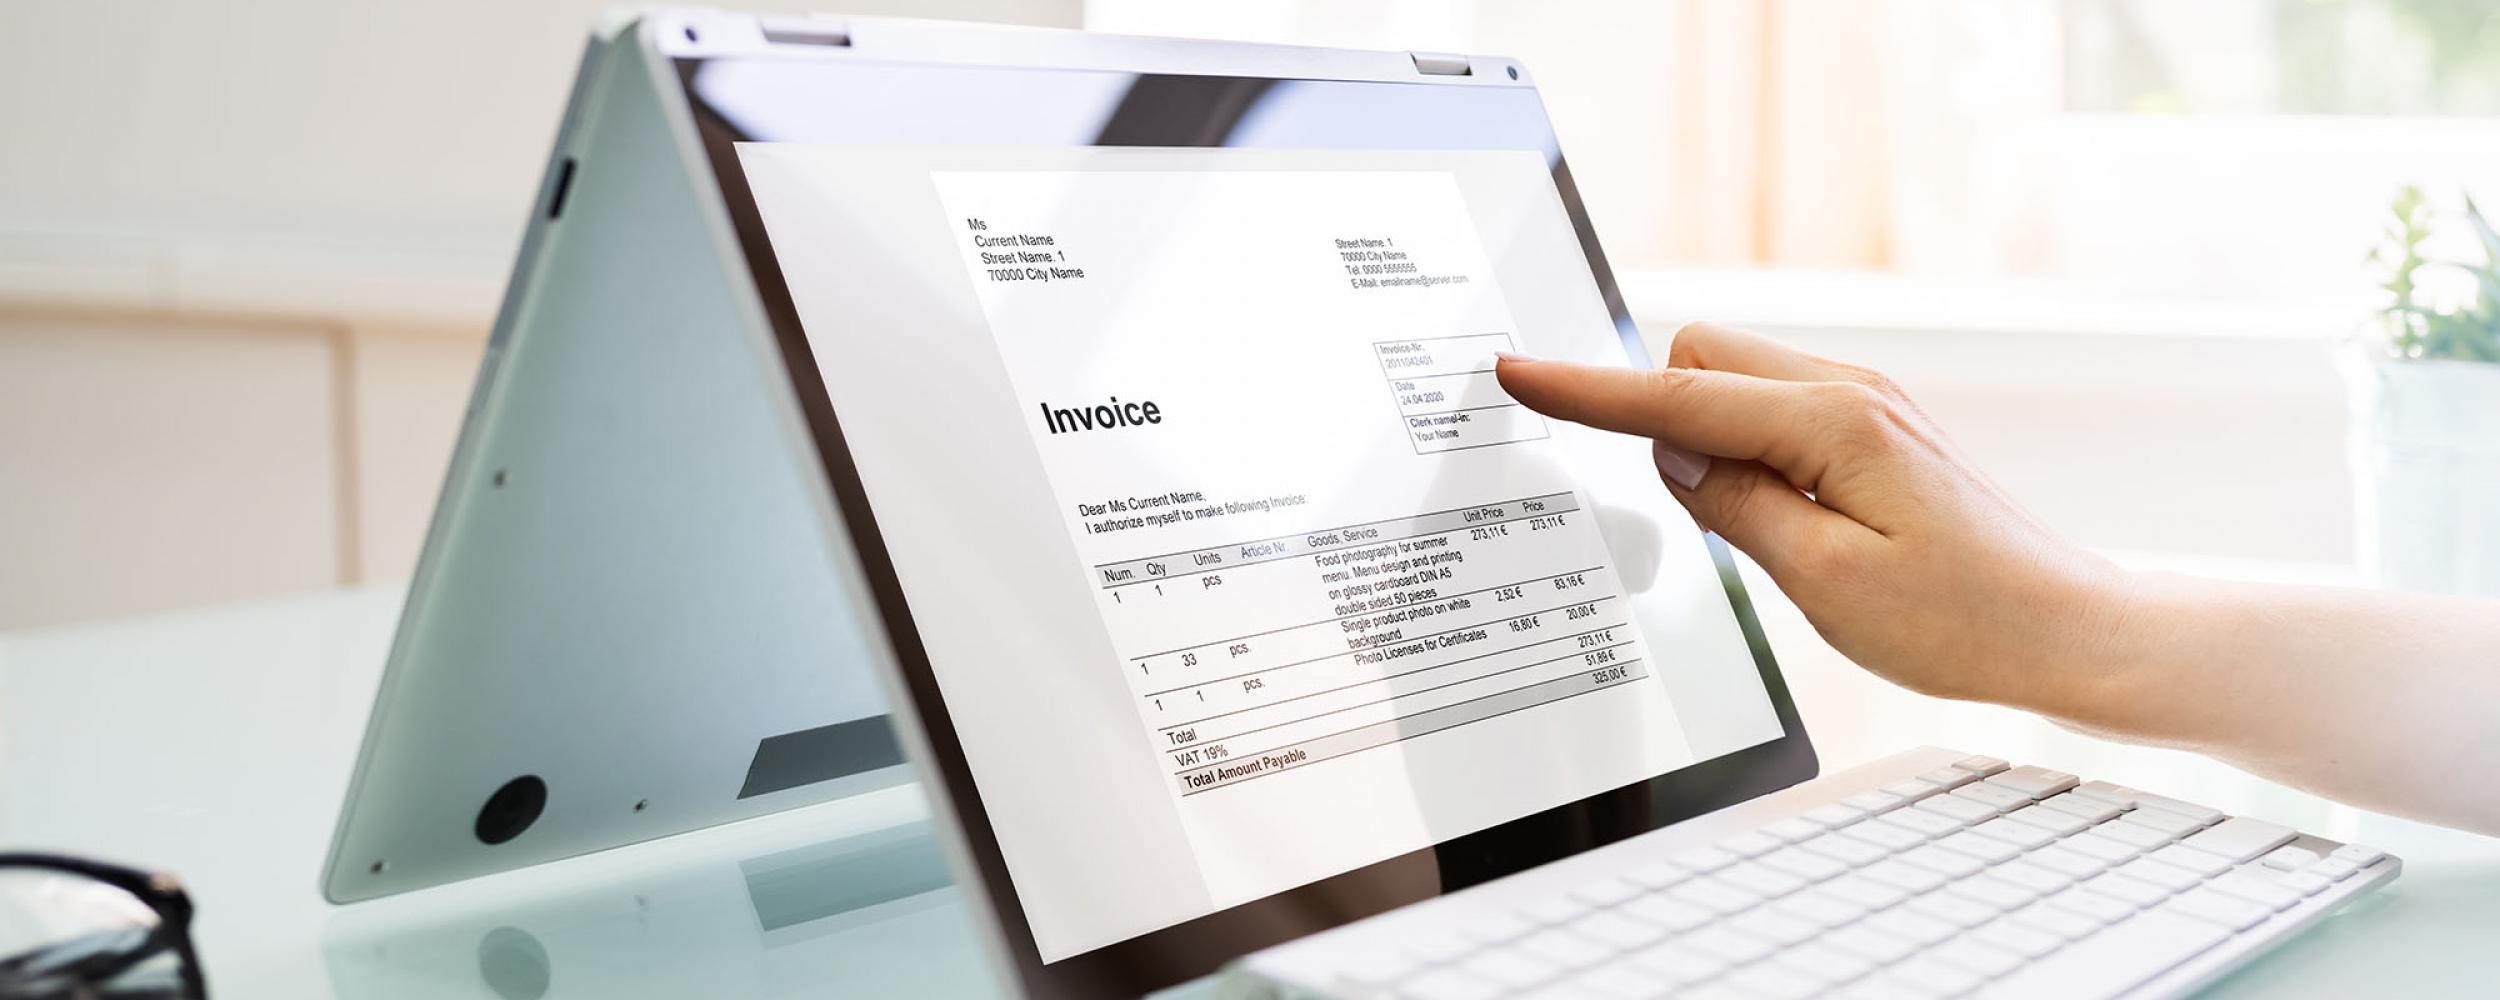 Electronic invoice is displayed on laptop